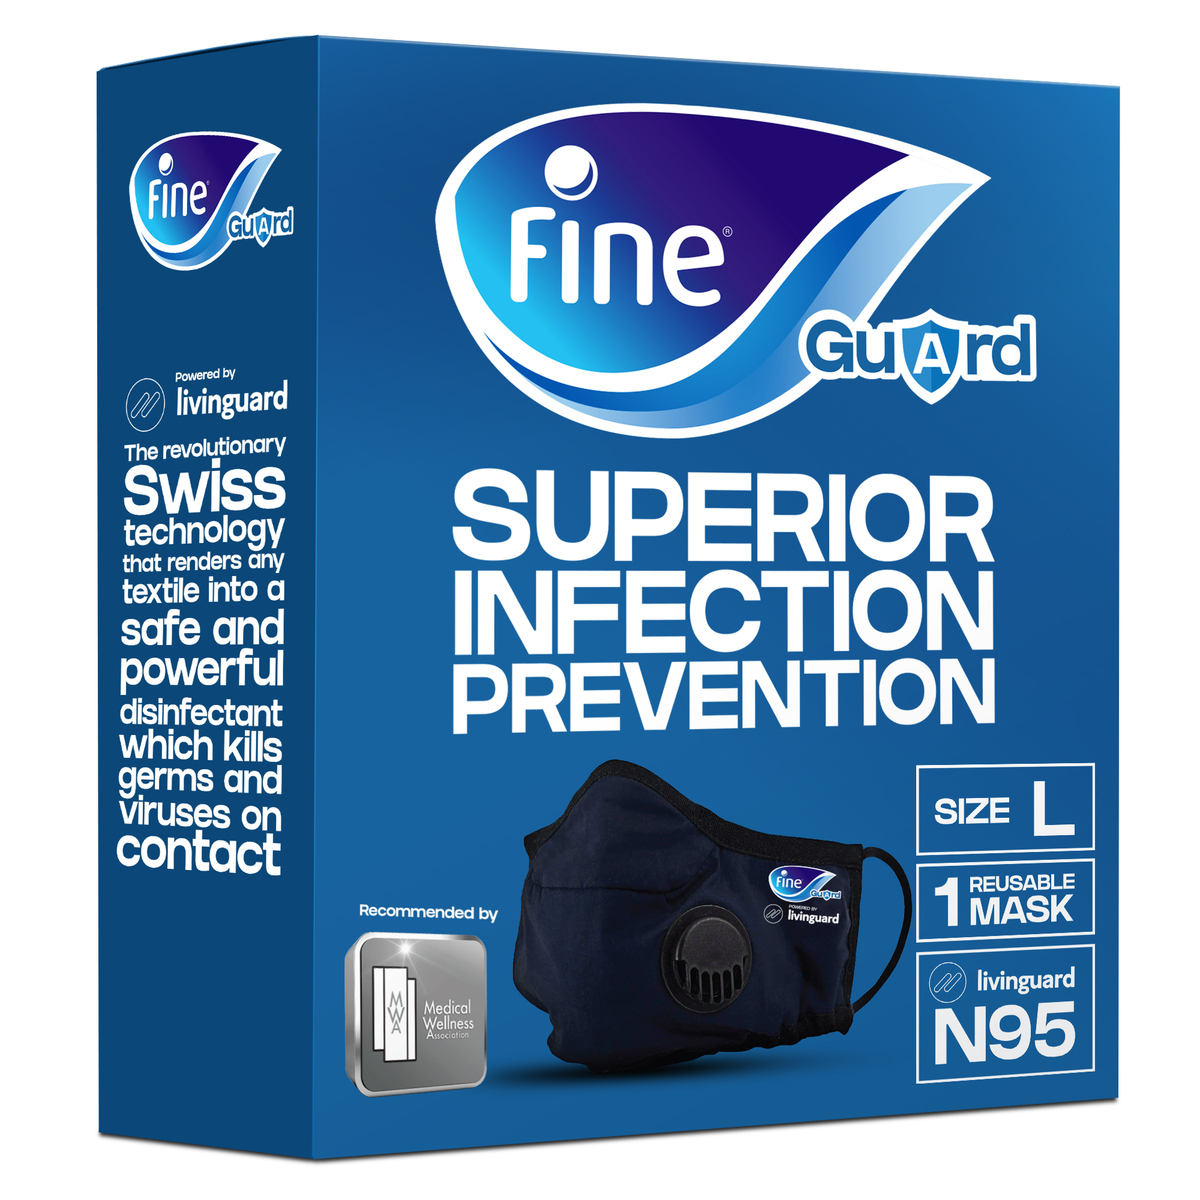 Fine Guard N95 Adult Face Mask With Livinguard Technology Infection Prevention Size Large 1pc